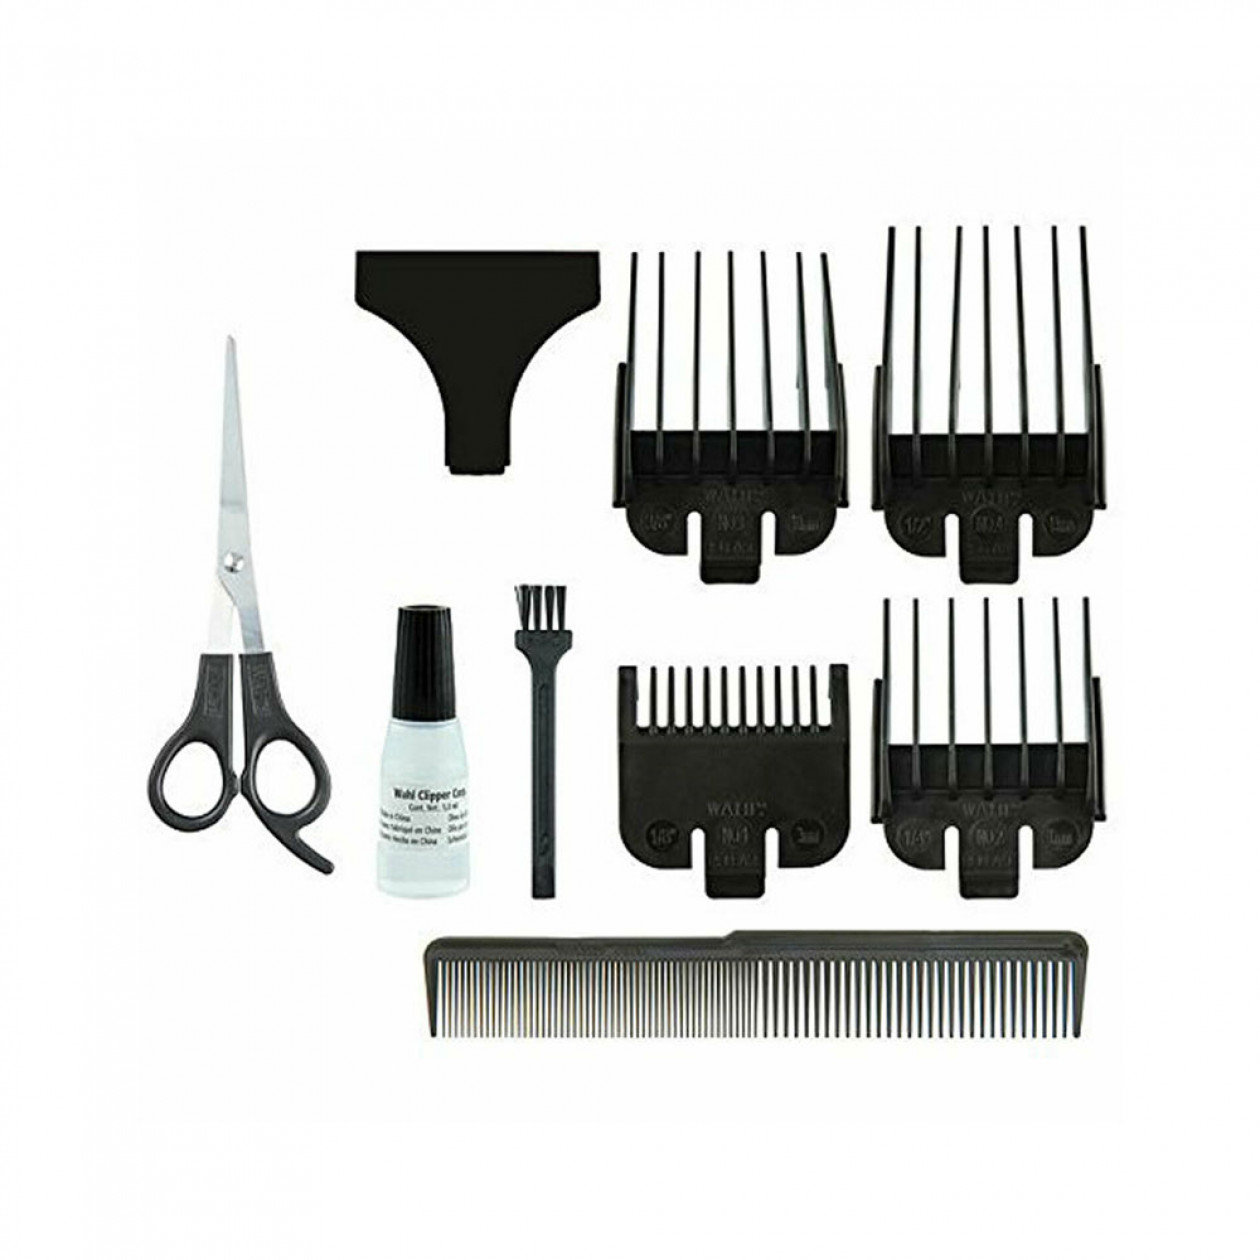 Wahl GroomEase 100 Series Mains Operated Hair Clipper Set – Black